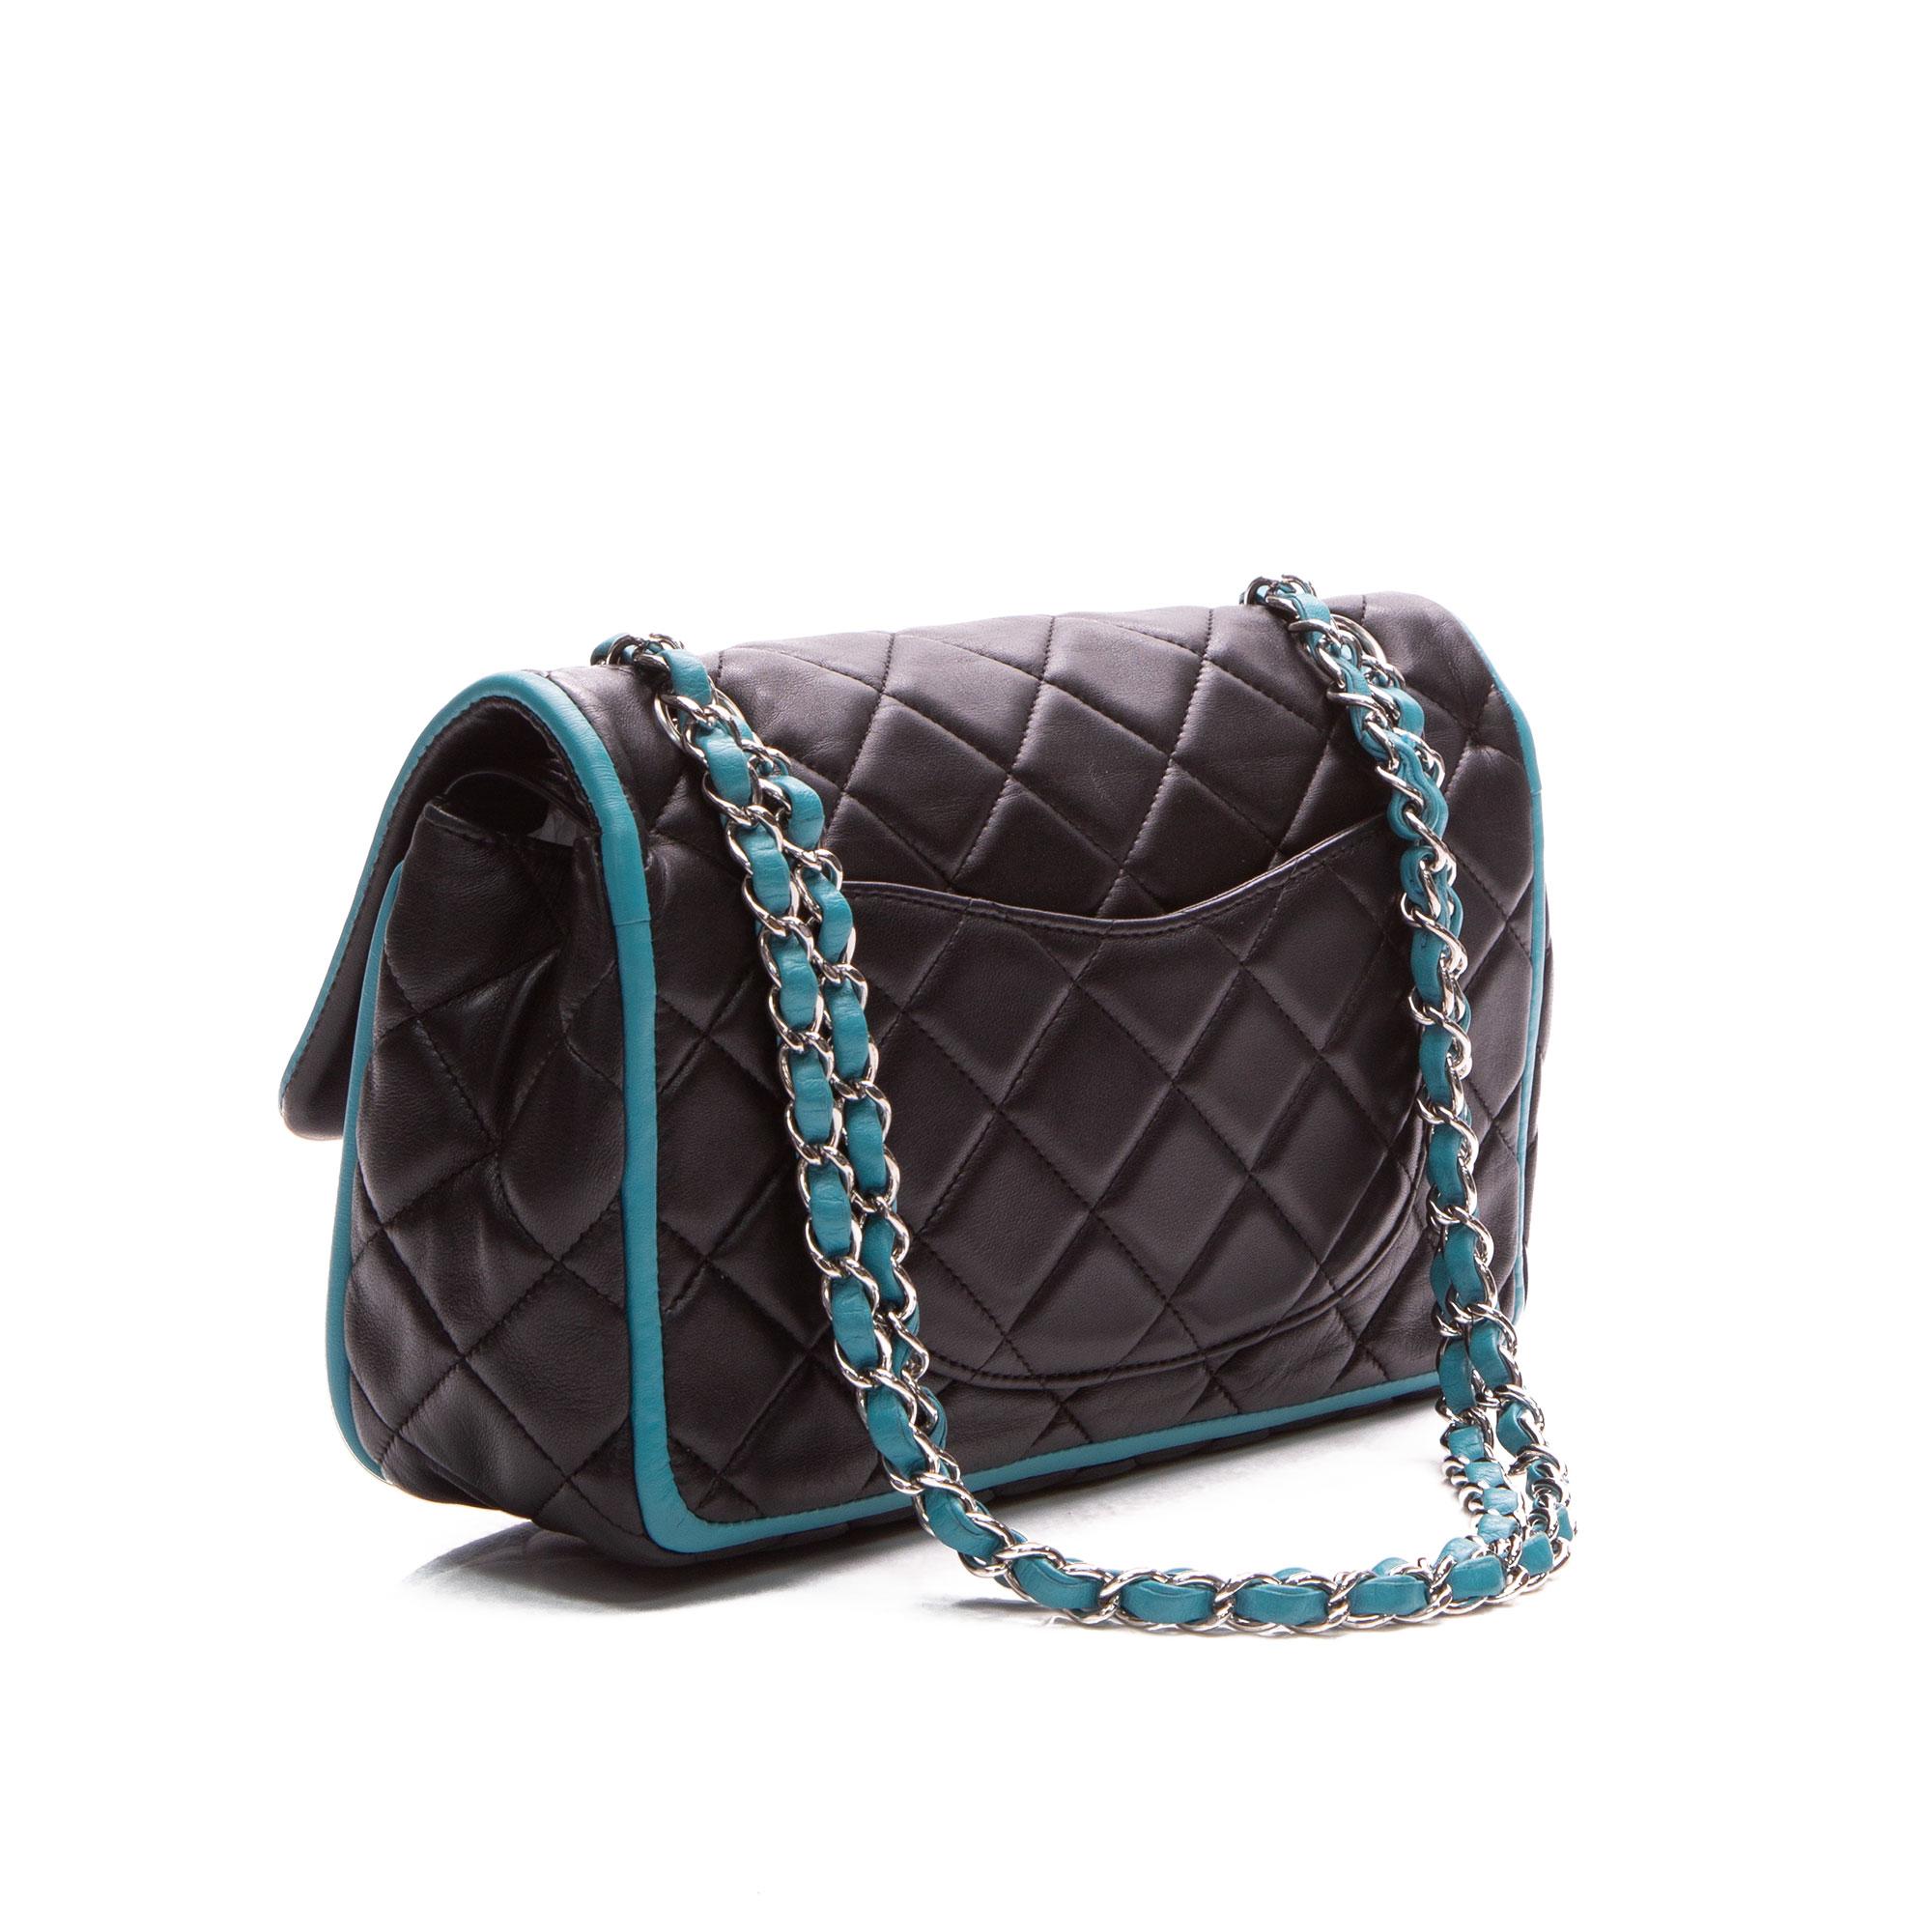 Chanel 2006 Medium Double Classic Flap in Black Lambskin Turquoise Piping Bag For Sale 5